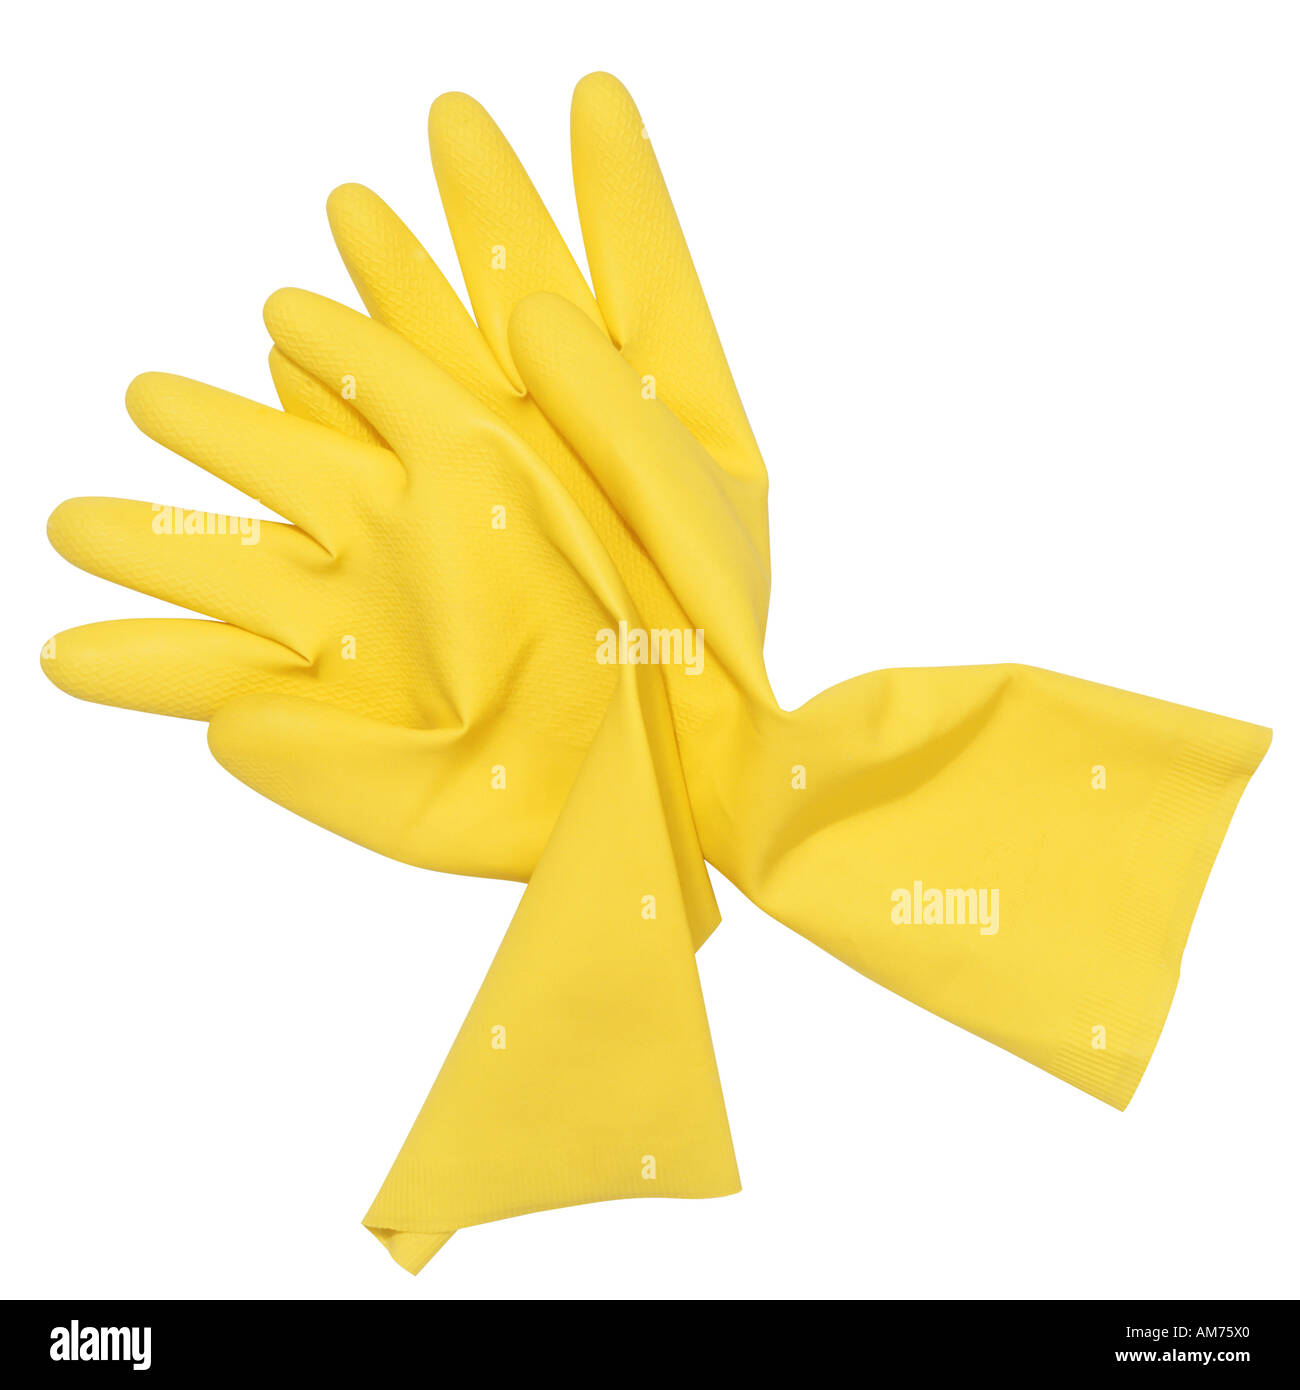 A pair of yellow rubber gloves Stock Photo